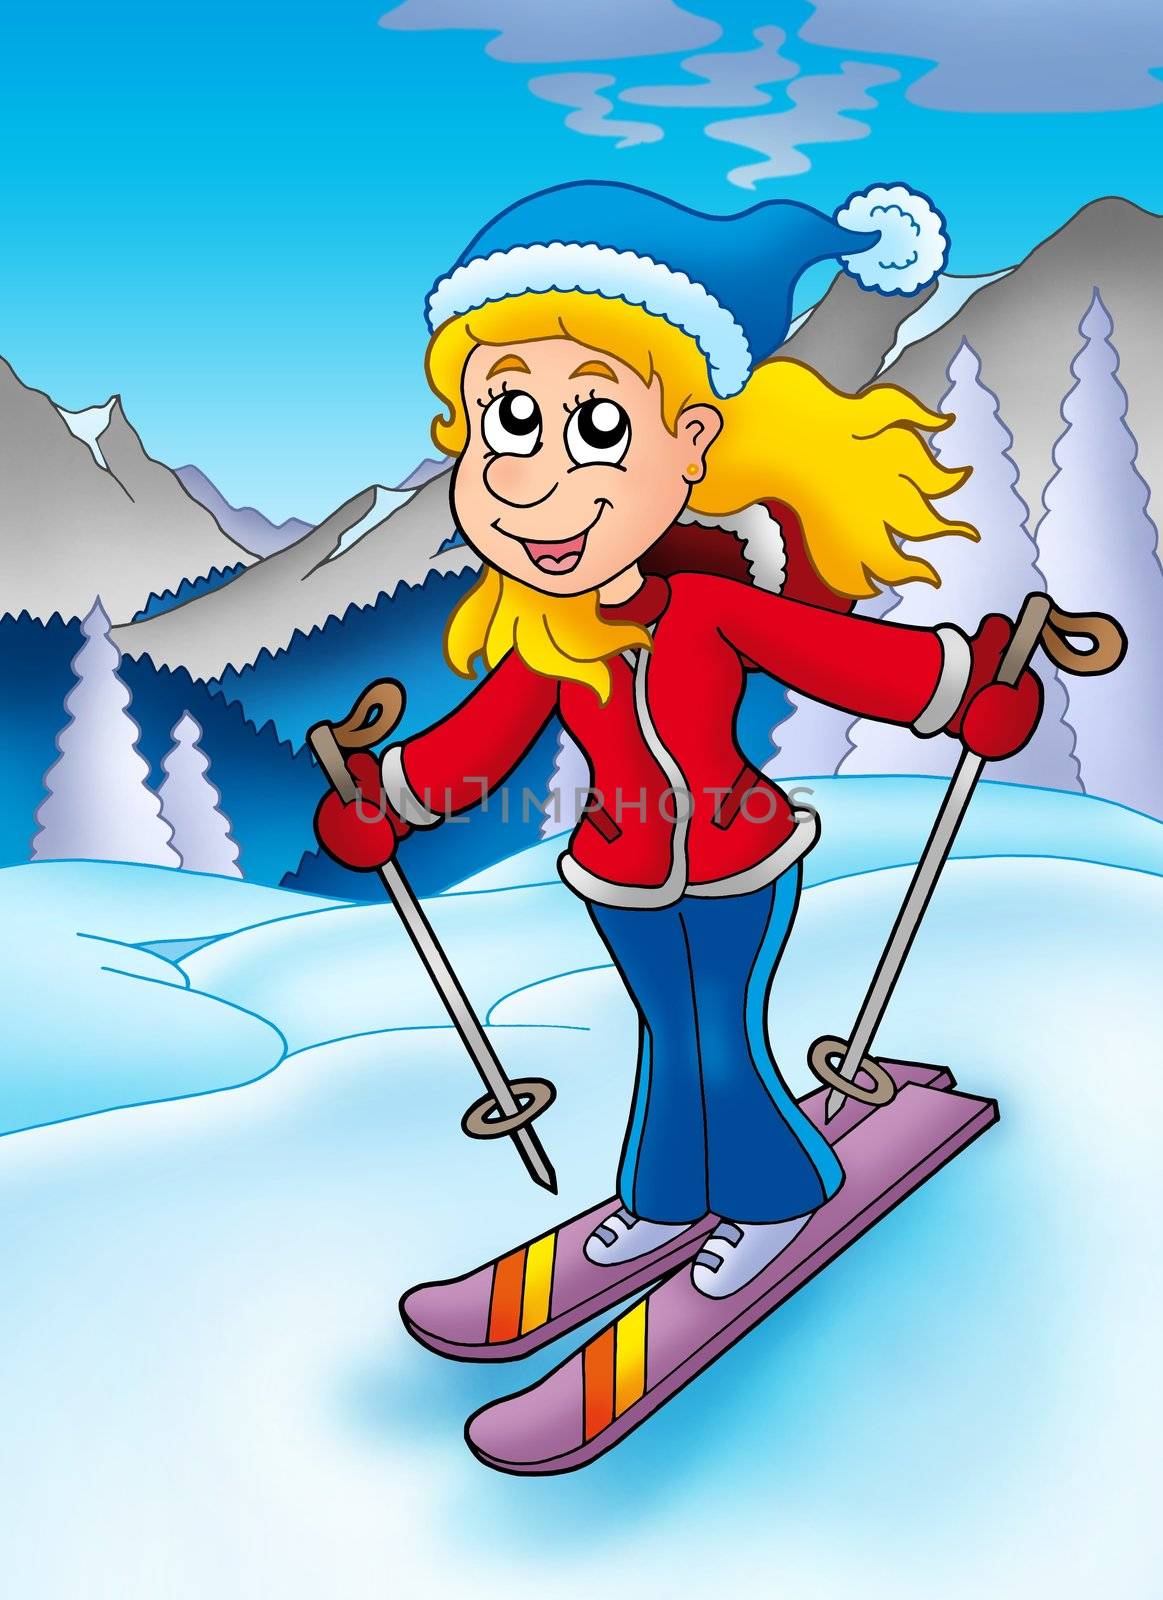 Skiing woman in mountains - color illustration.